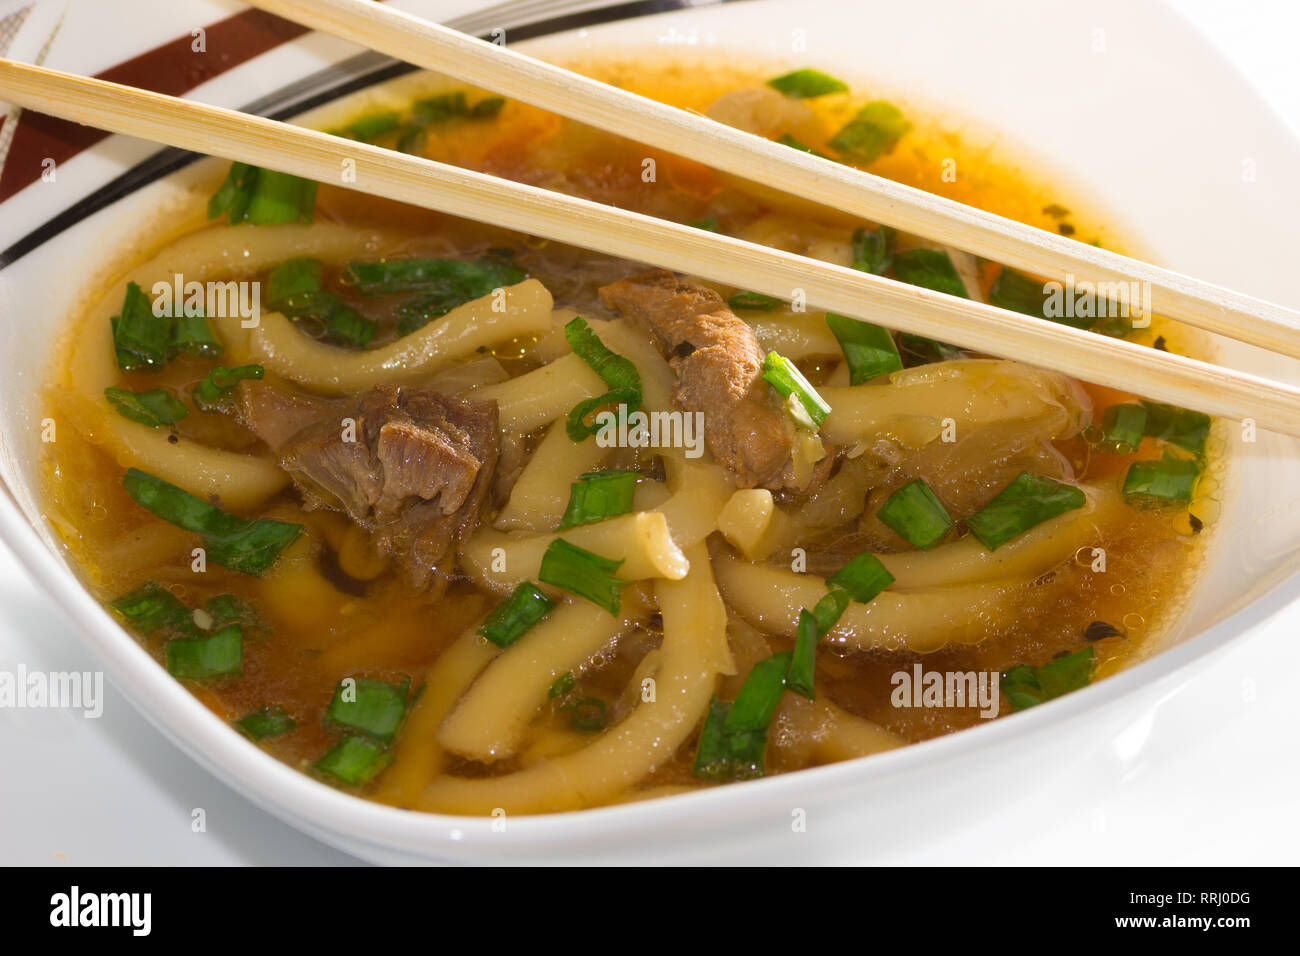 Bowl of miso soup with udon noodles, cabbage, pork and green onions with chopsticks on a bamboo napkin Stock Photo